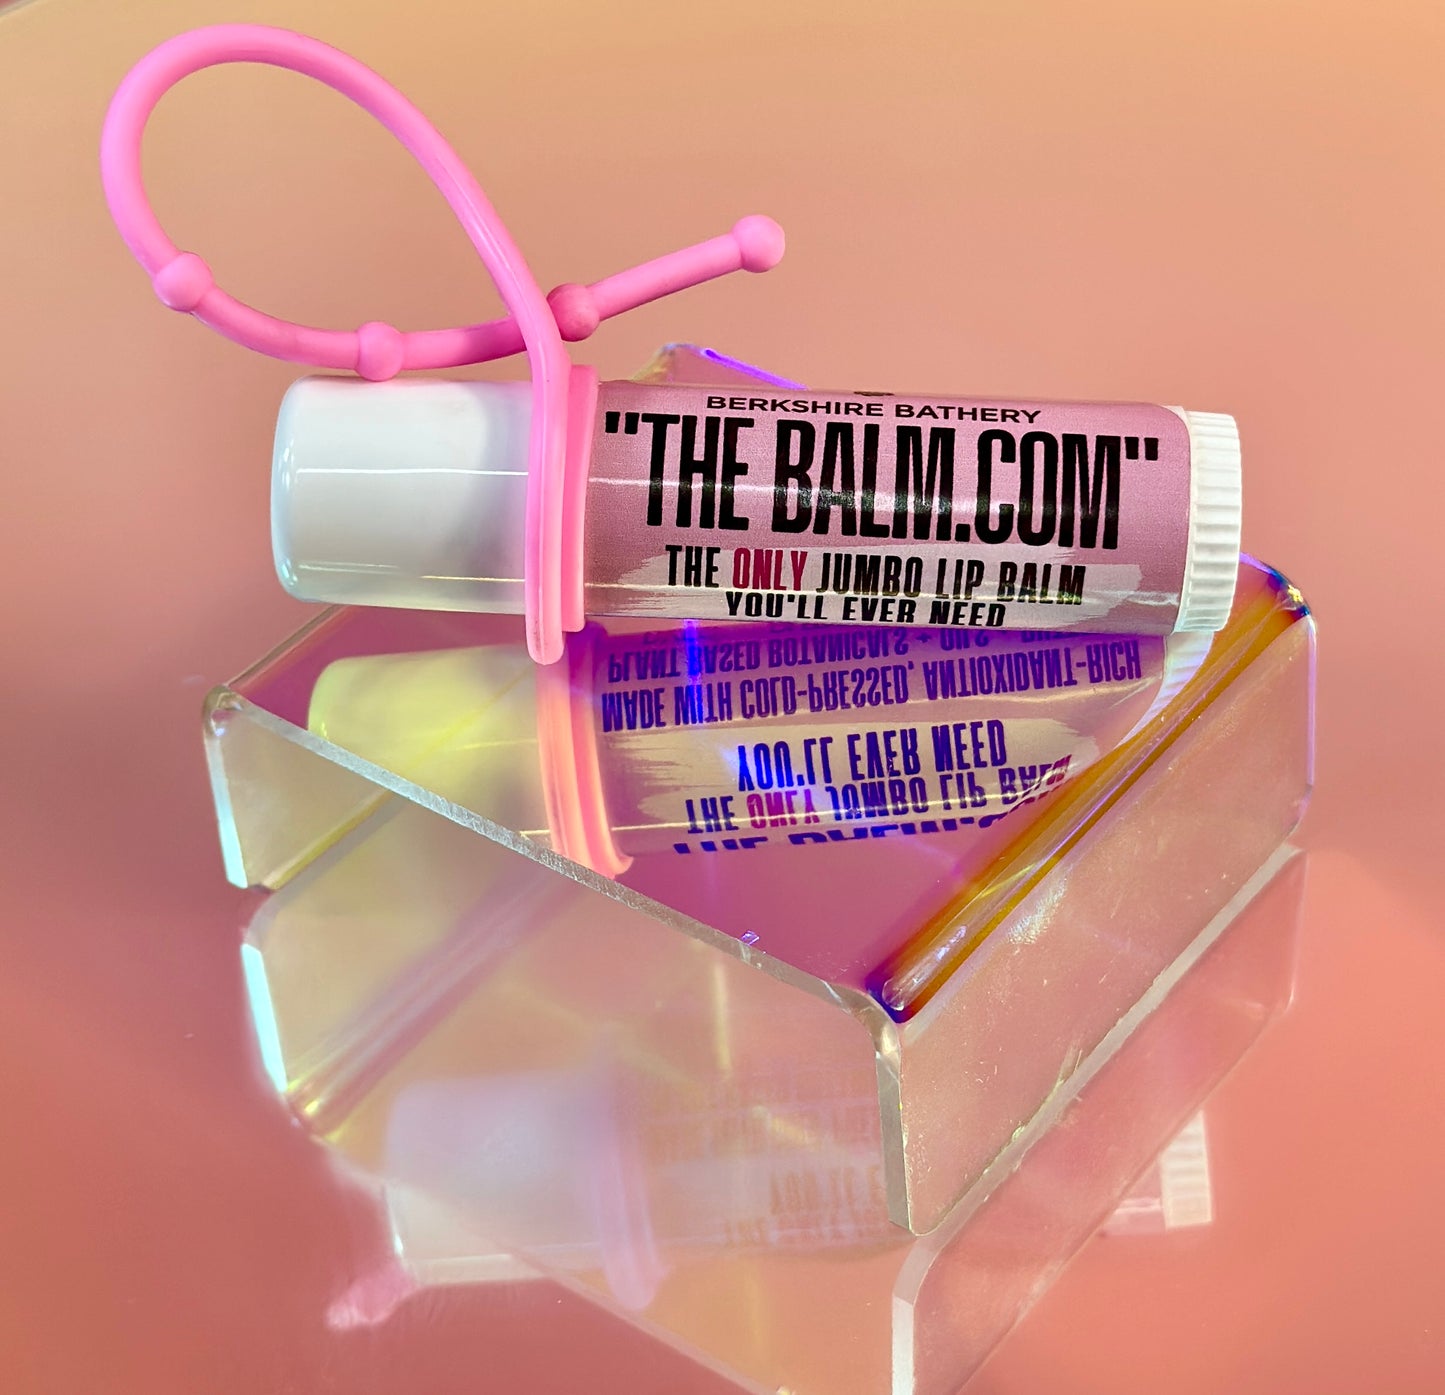 "THE BALM.COM" | The Only Jumbo Lip Balm You'll Ever Need by